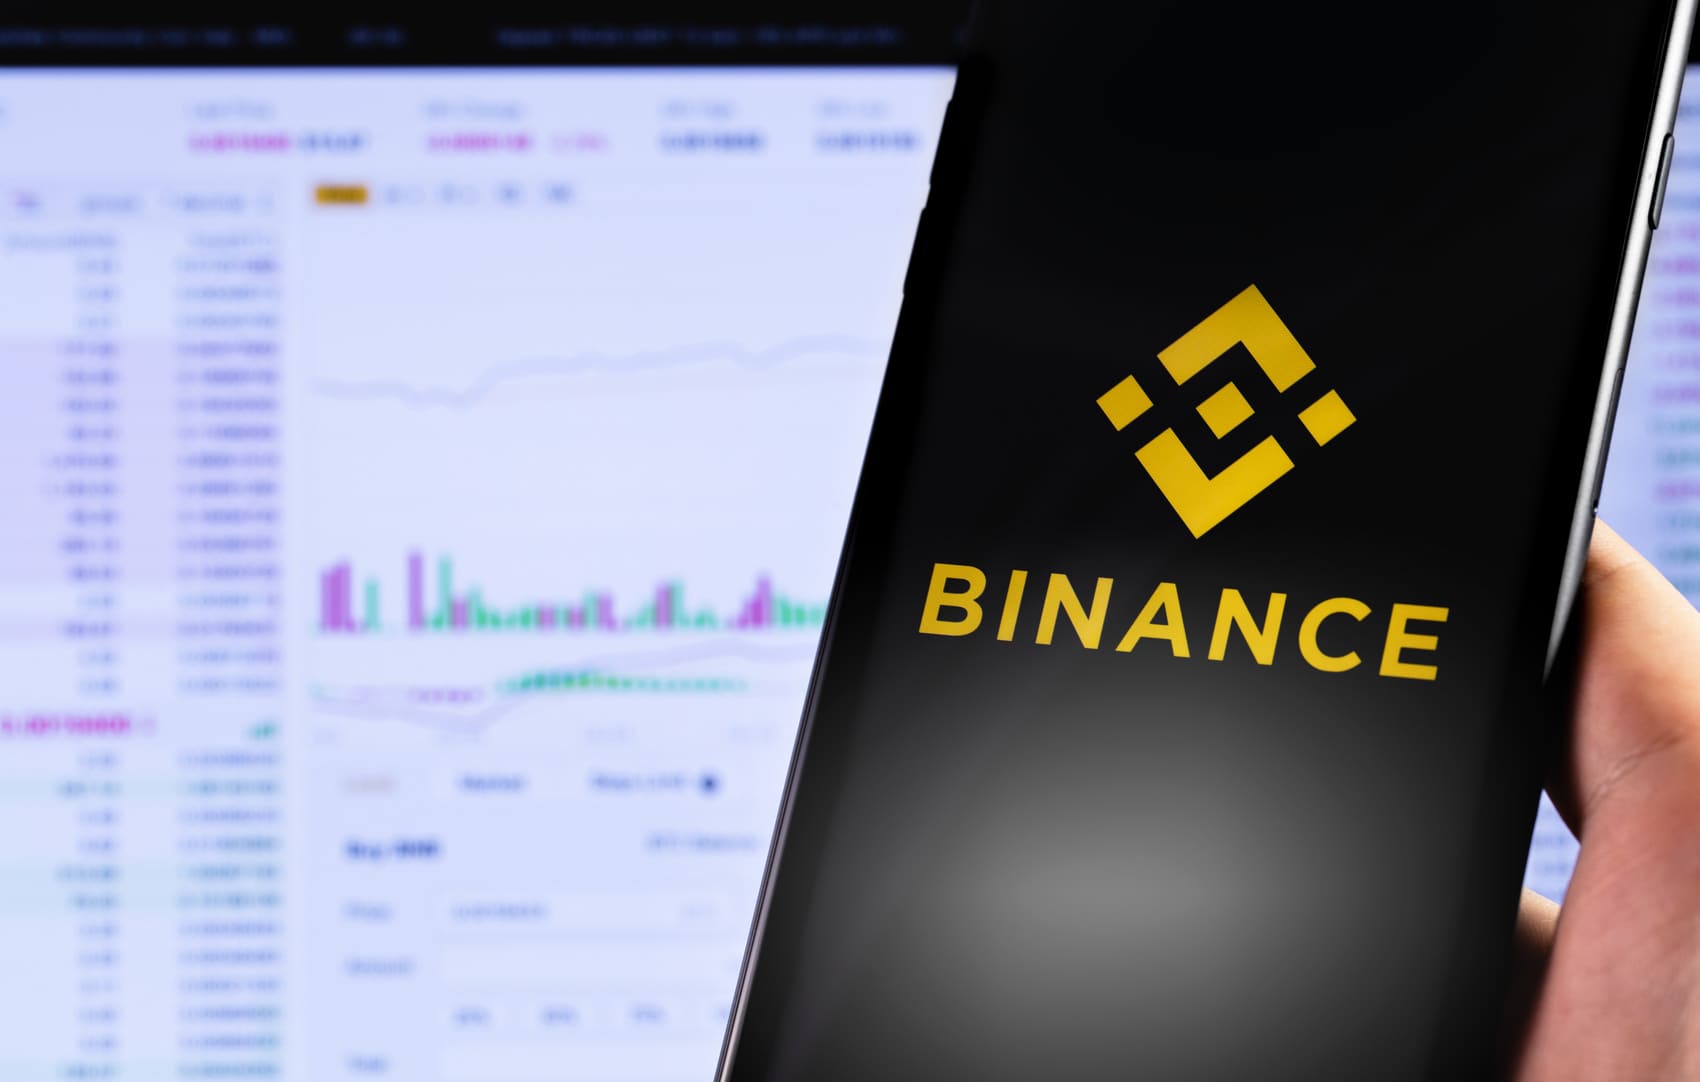 Binance to convert users' stablecoins into its own BUSD